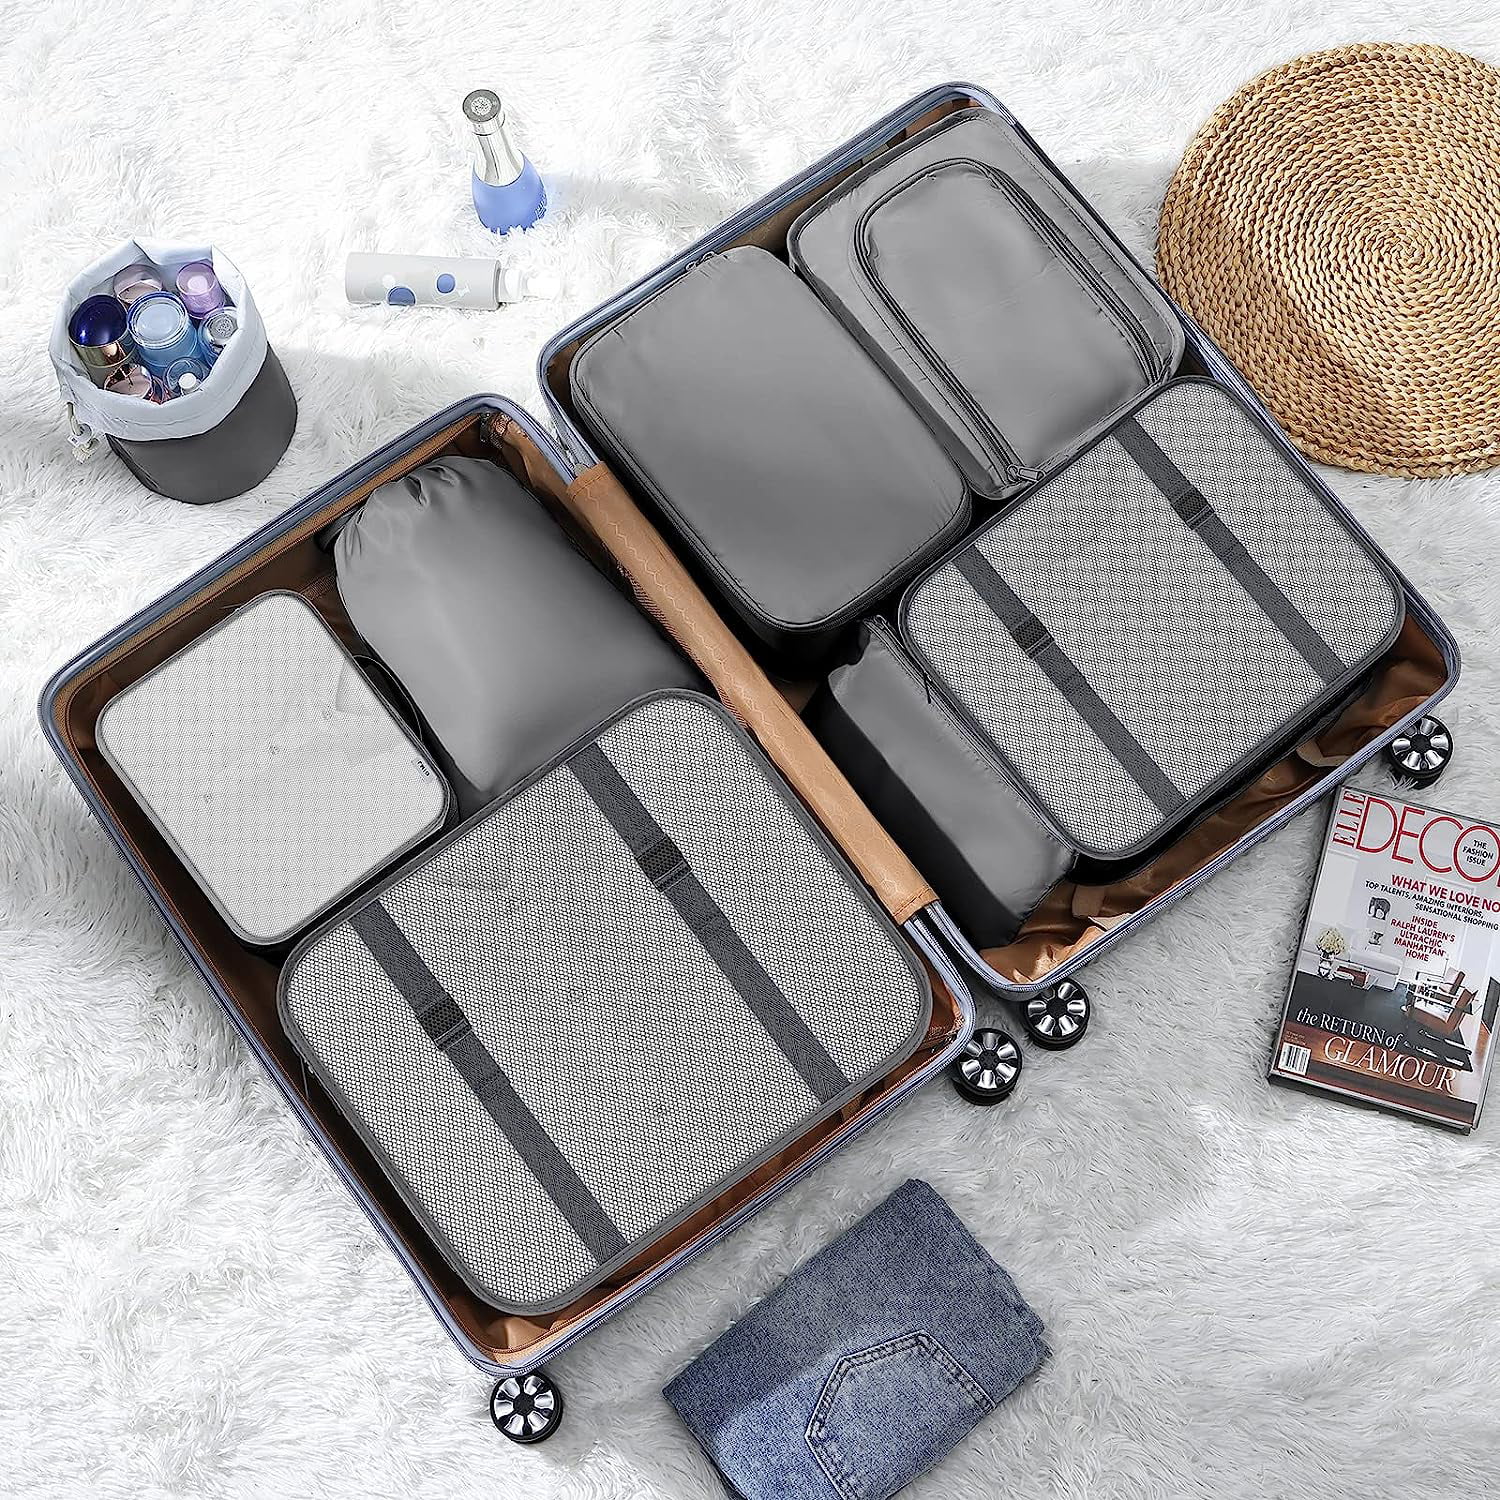 DIMJ Packing Cubes for Travel, 8Pcs Foldable Suitcase Organizer Set for  Bra, Socks, Cosmetics with Makeup Bucket Bag, Waterproof Lightweight Travel